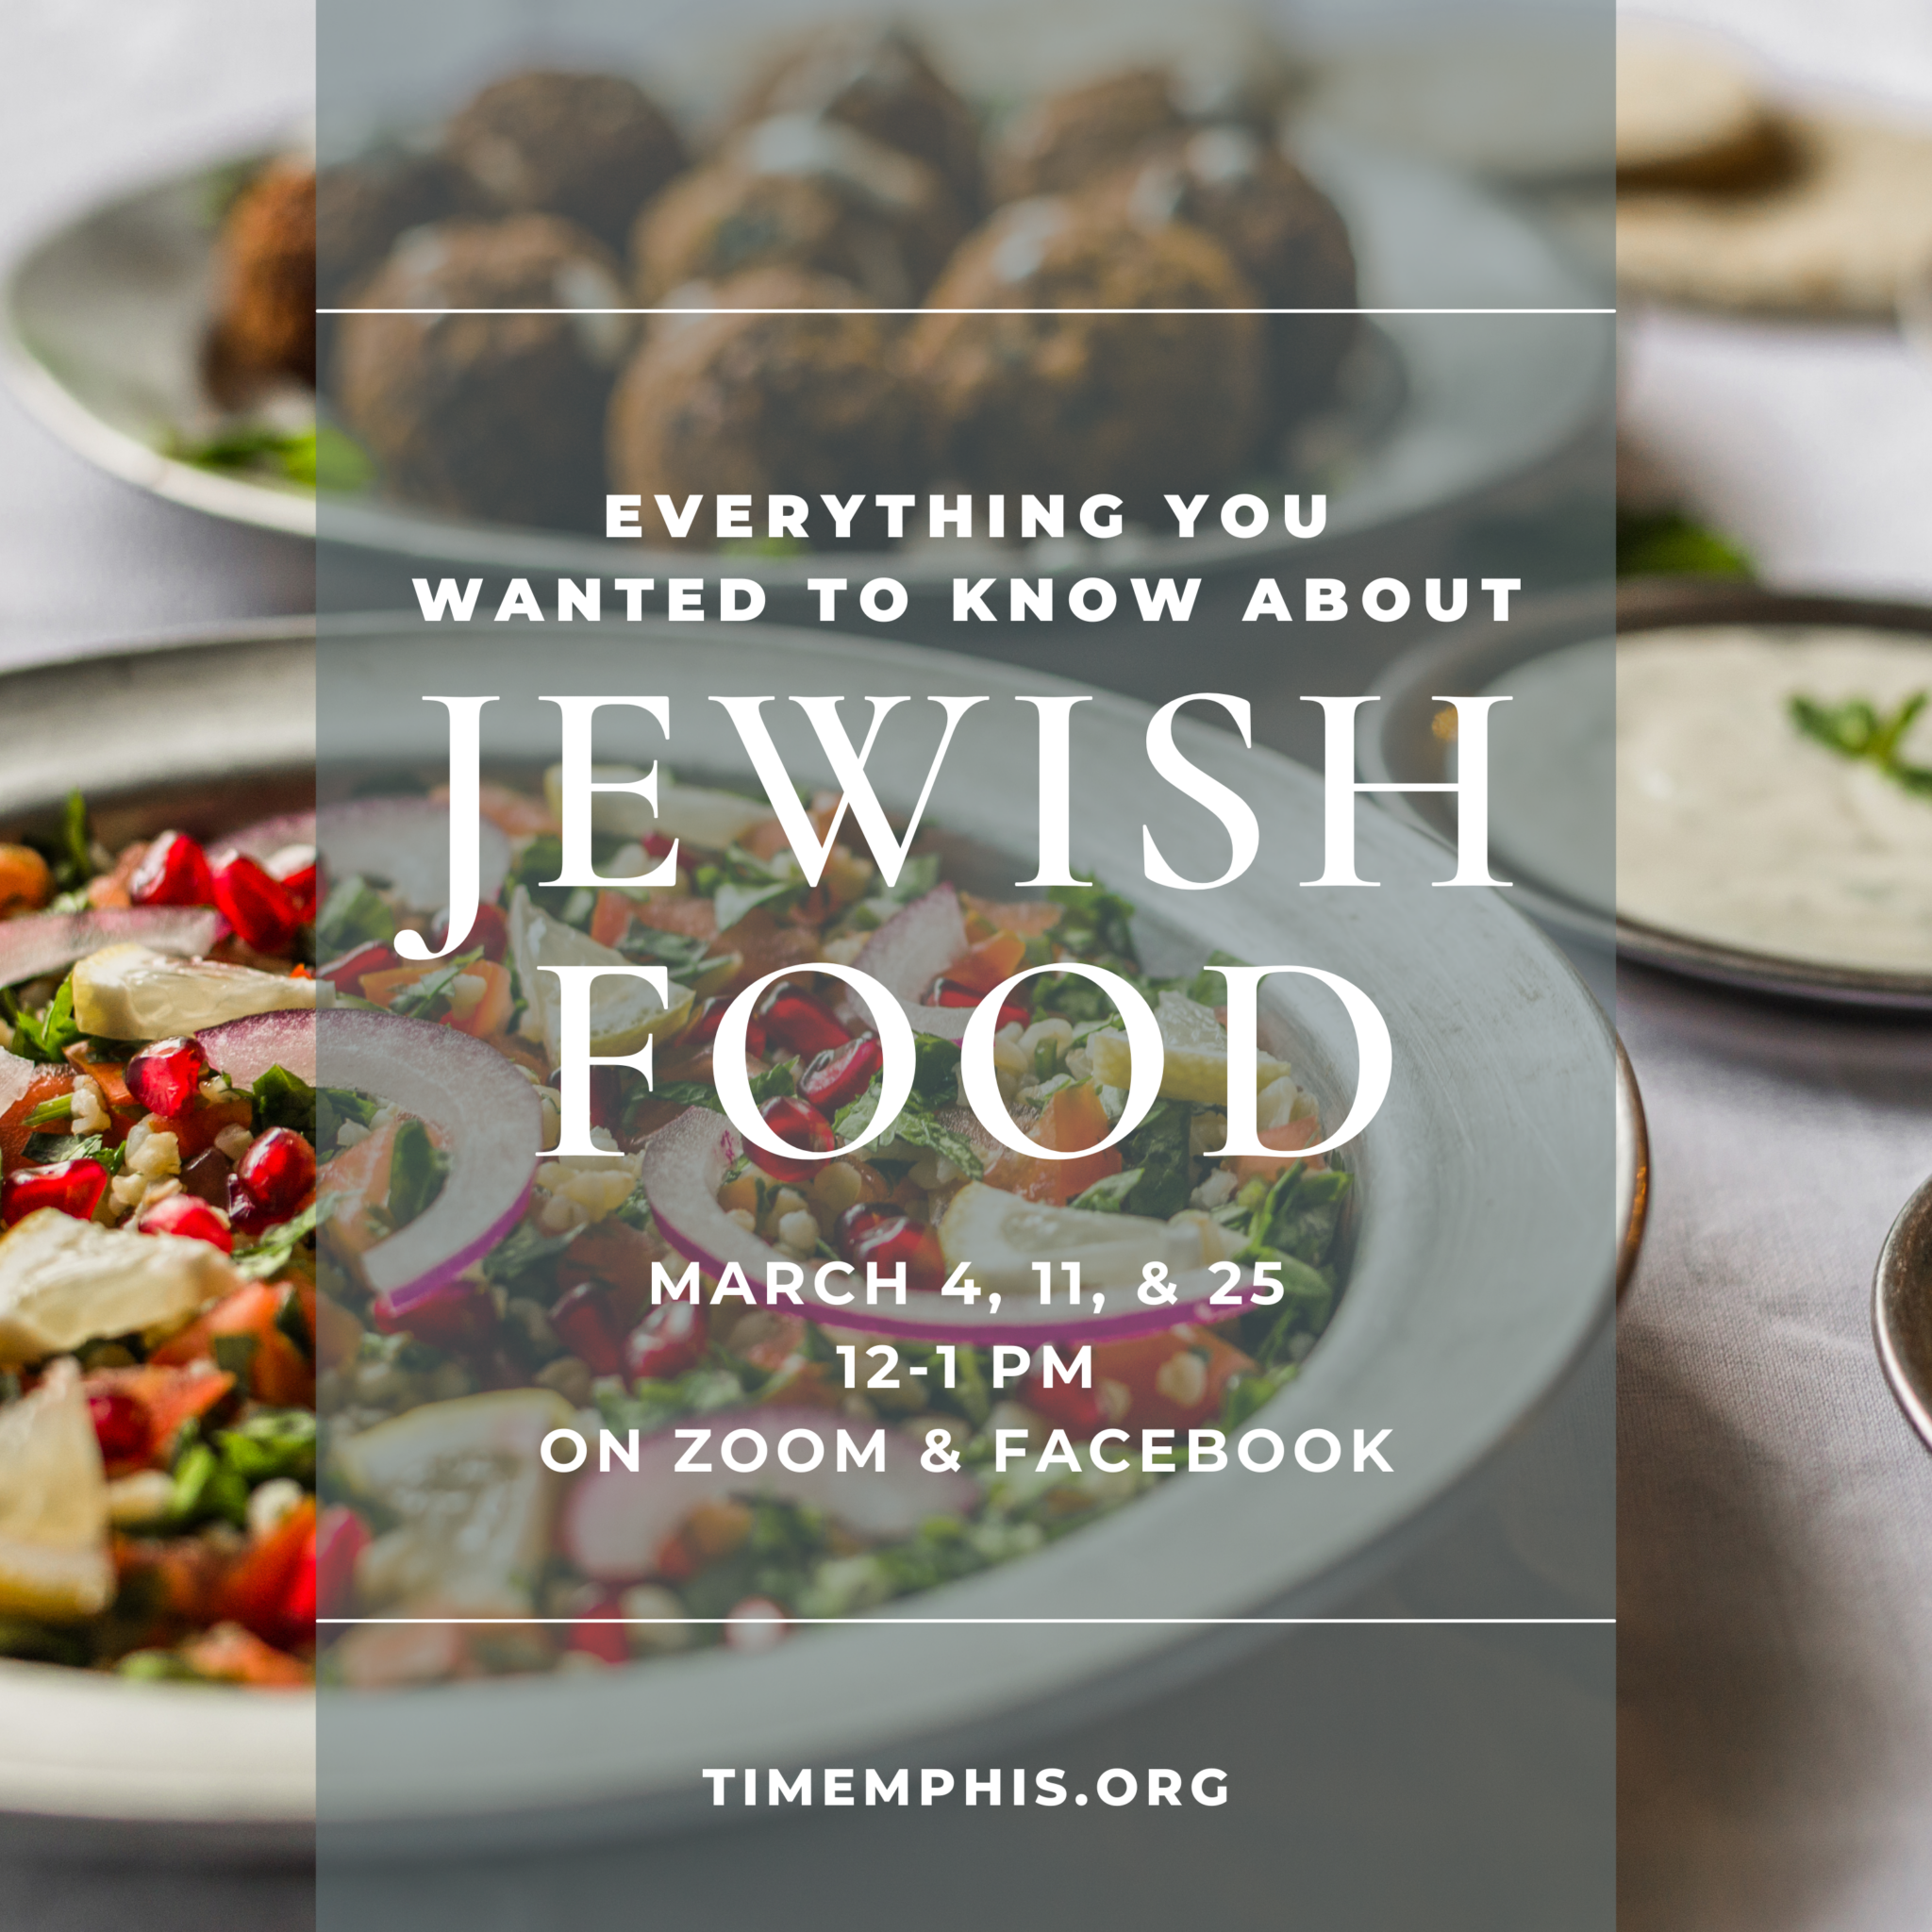 EVERYTHING YOU WANTED TO KNOW ABOUT Jewish food